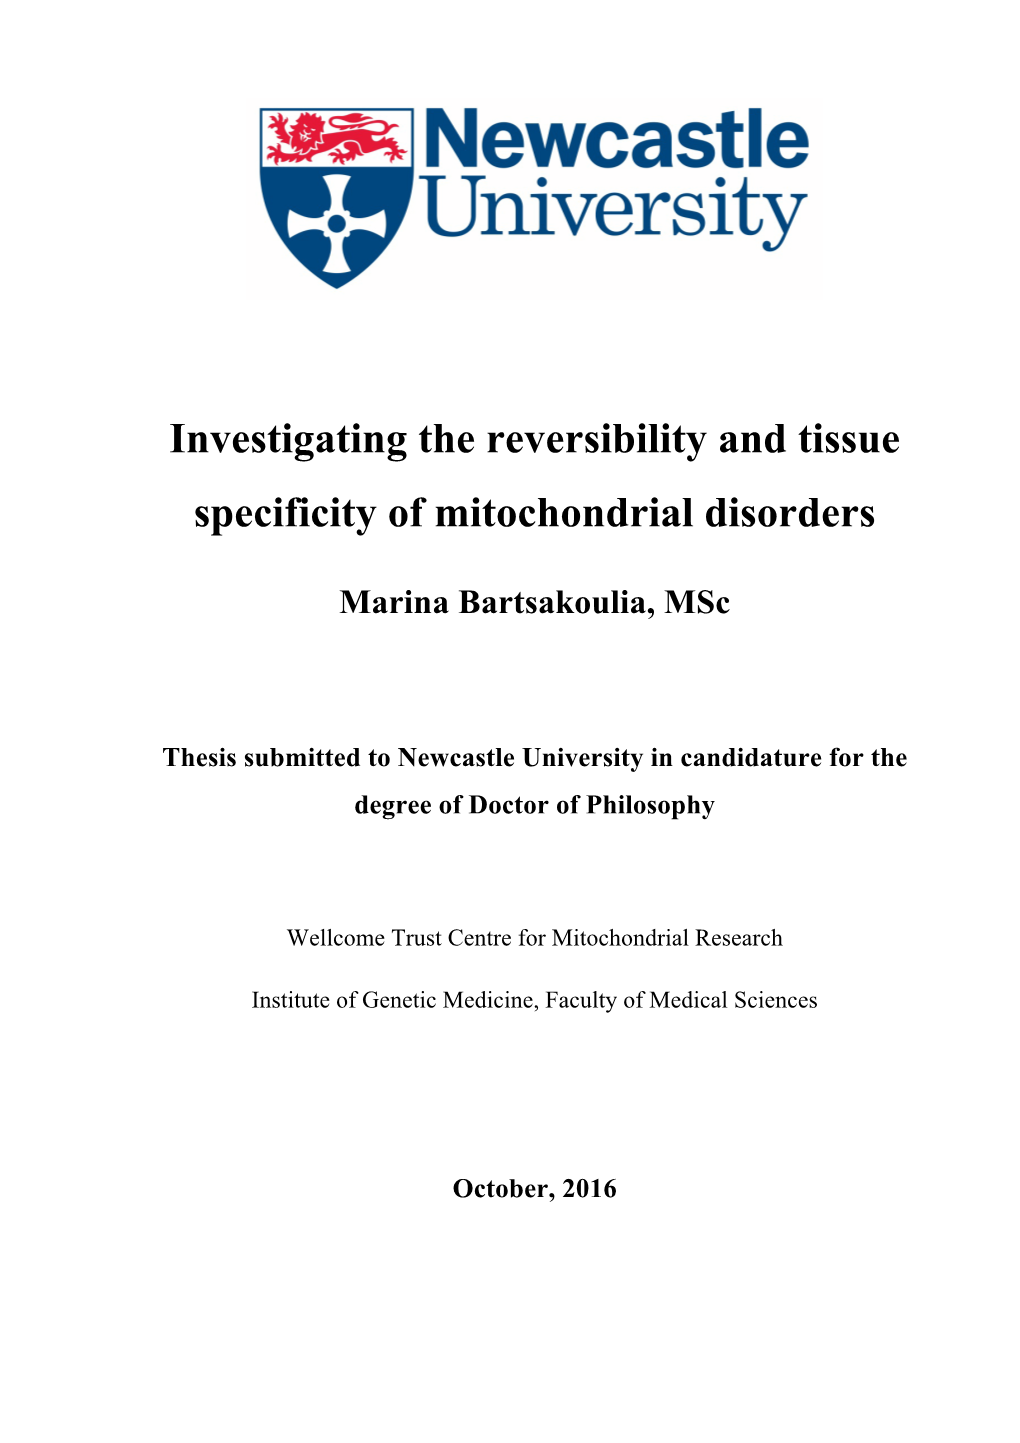 Investigating the Reversibility and Tissue Specificity of Mitochondrial Disorders